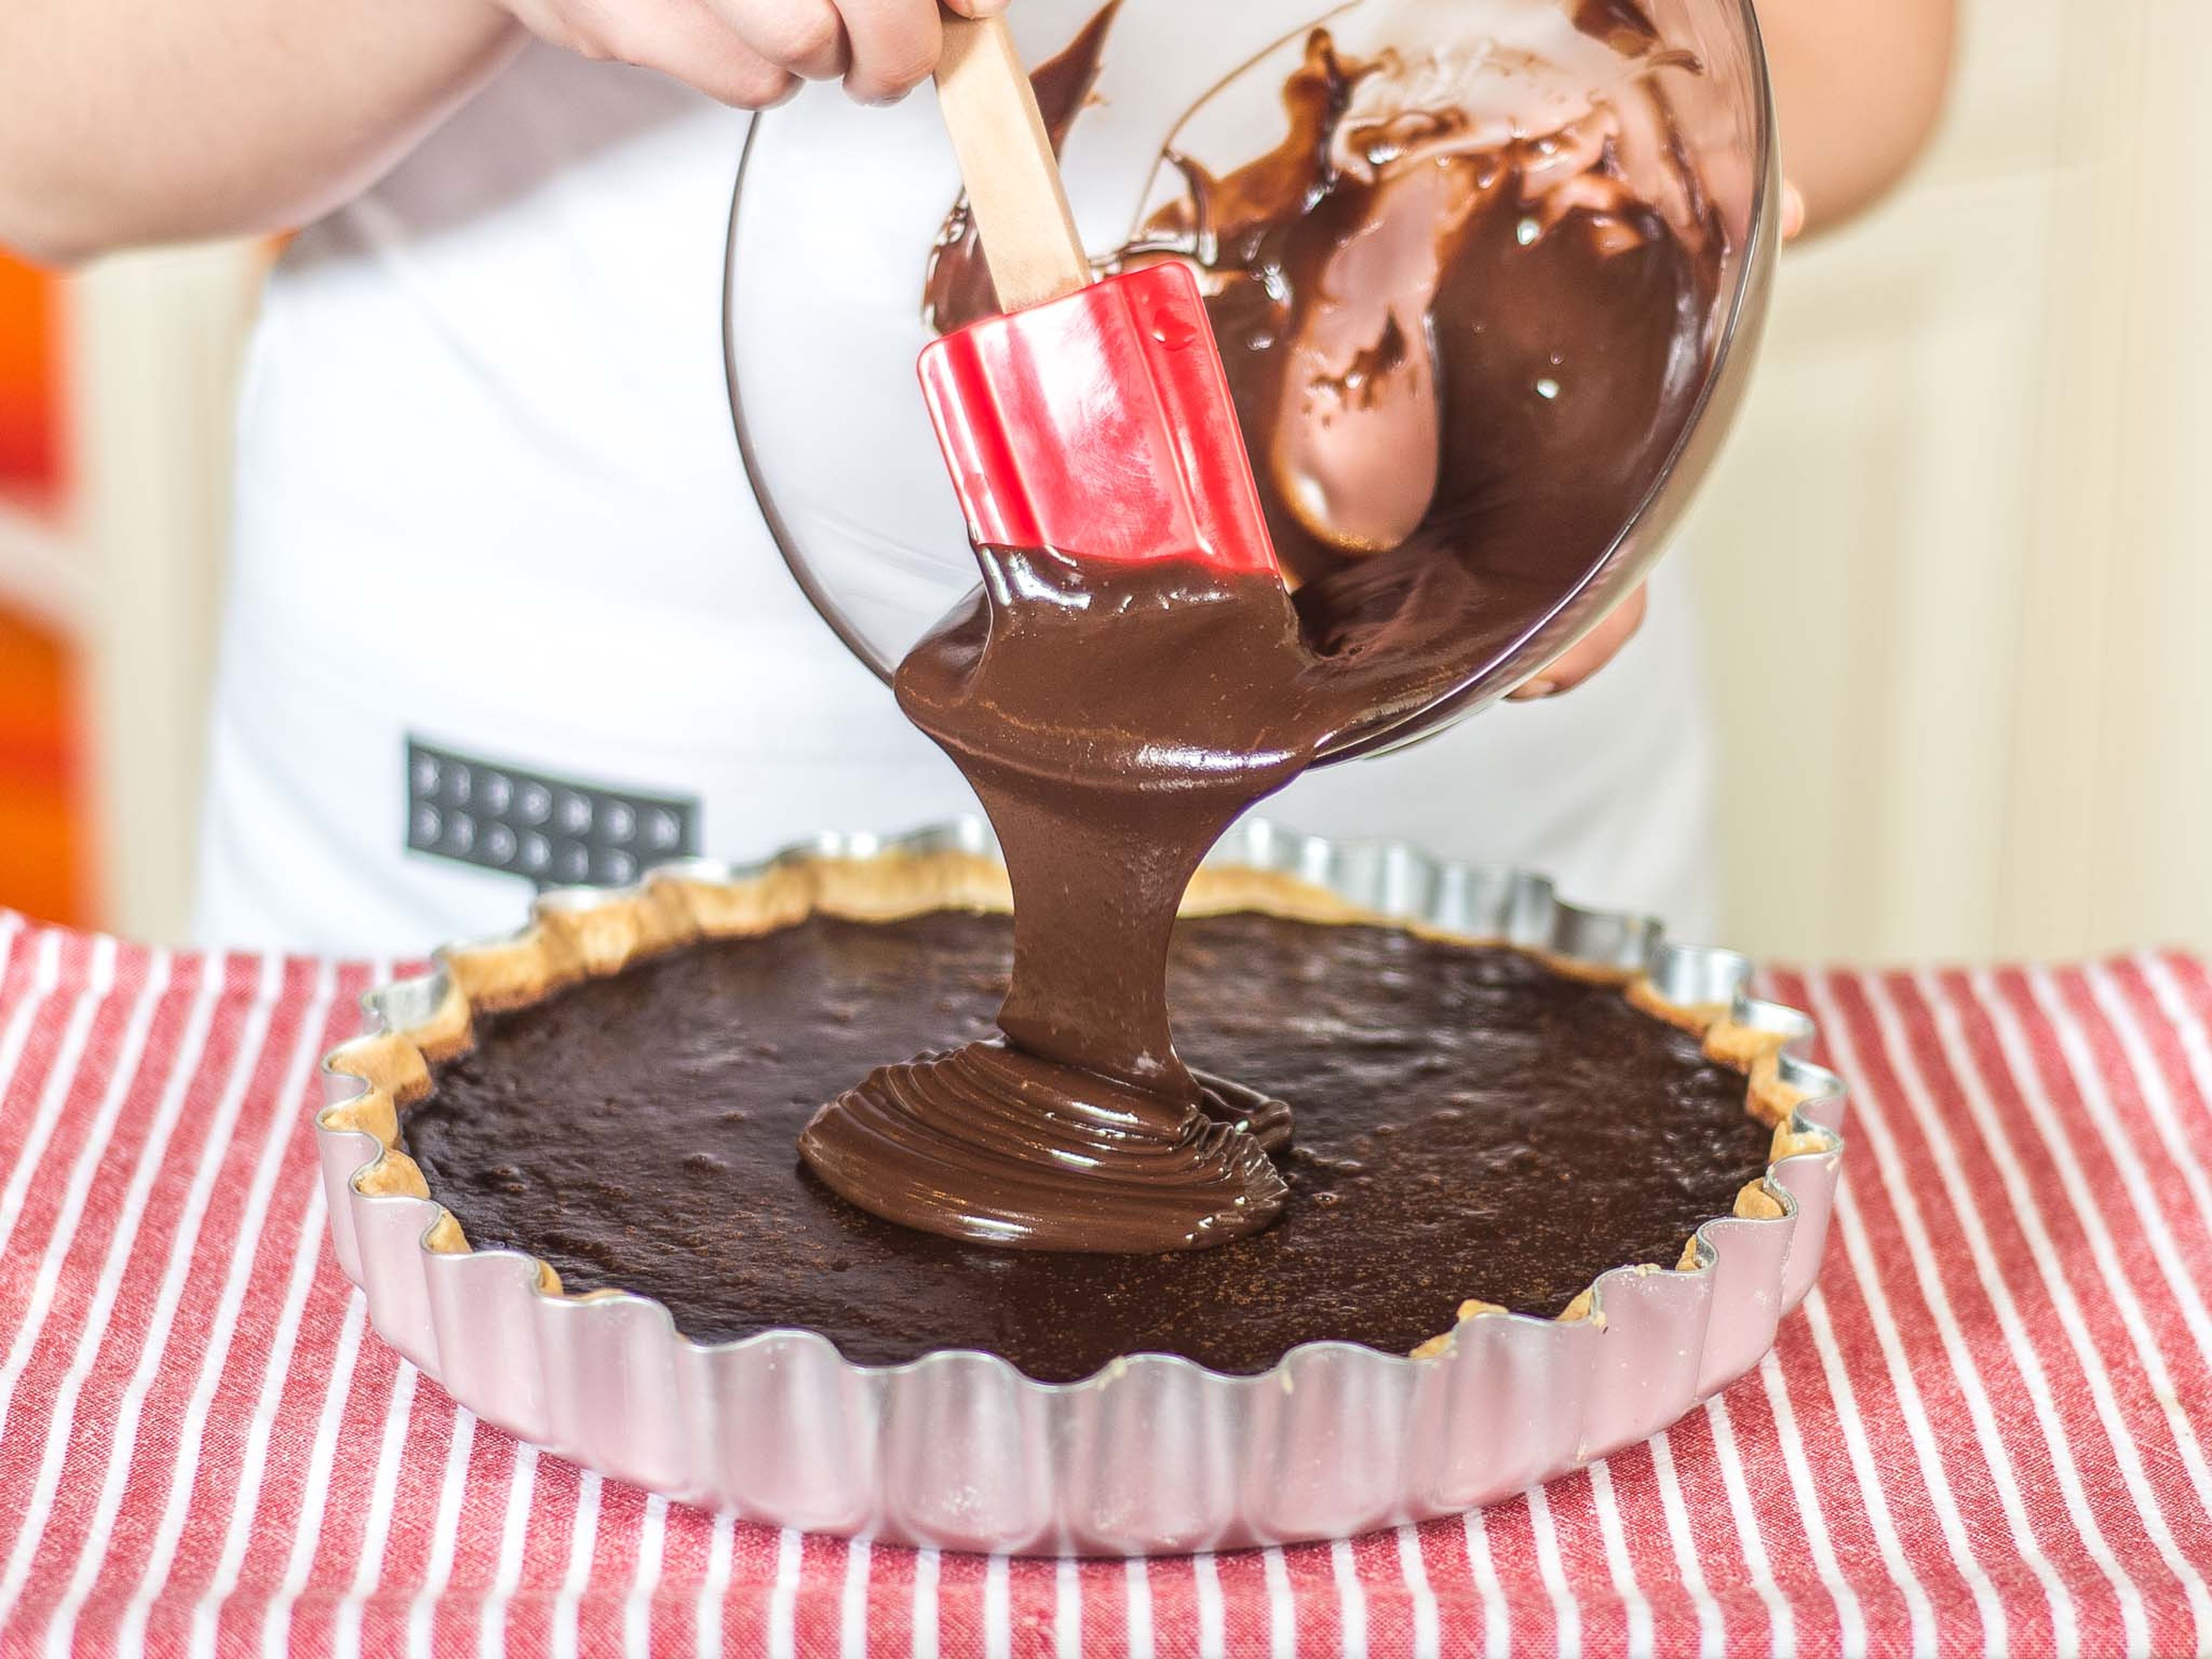 Spread the ganache over the cooled tart. Chill the tart for at least 1 hour before serving. Serve with a garnish of cream and fresh berries, as desired.